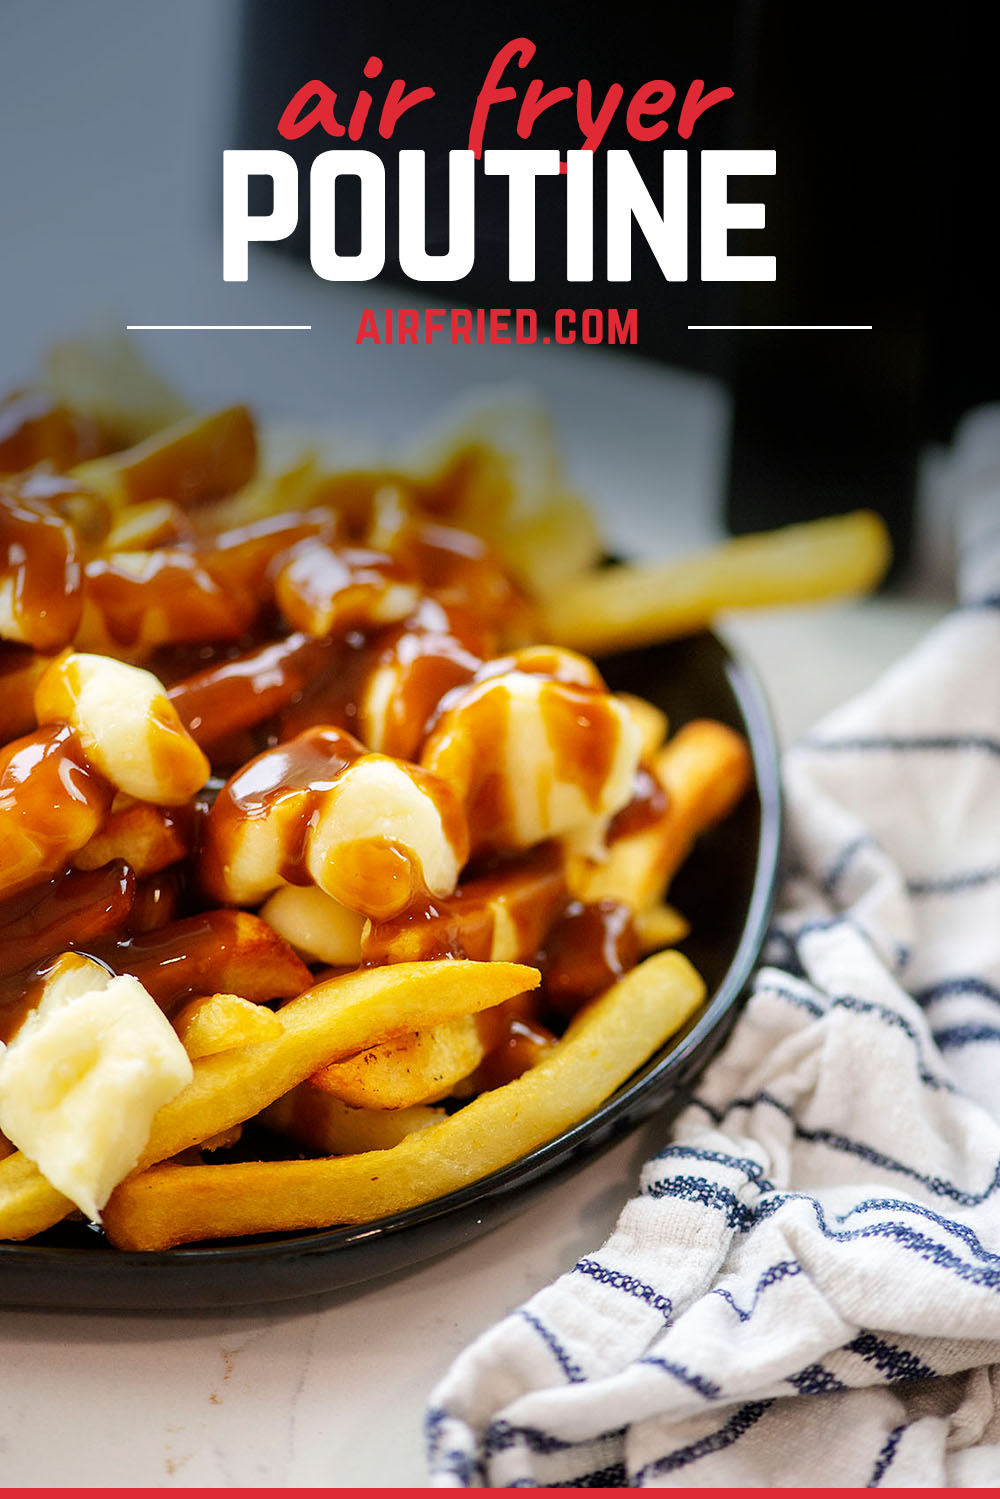 Check out this air fryer poutine recipe for easy, delicious poutine!